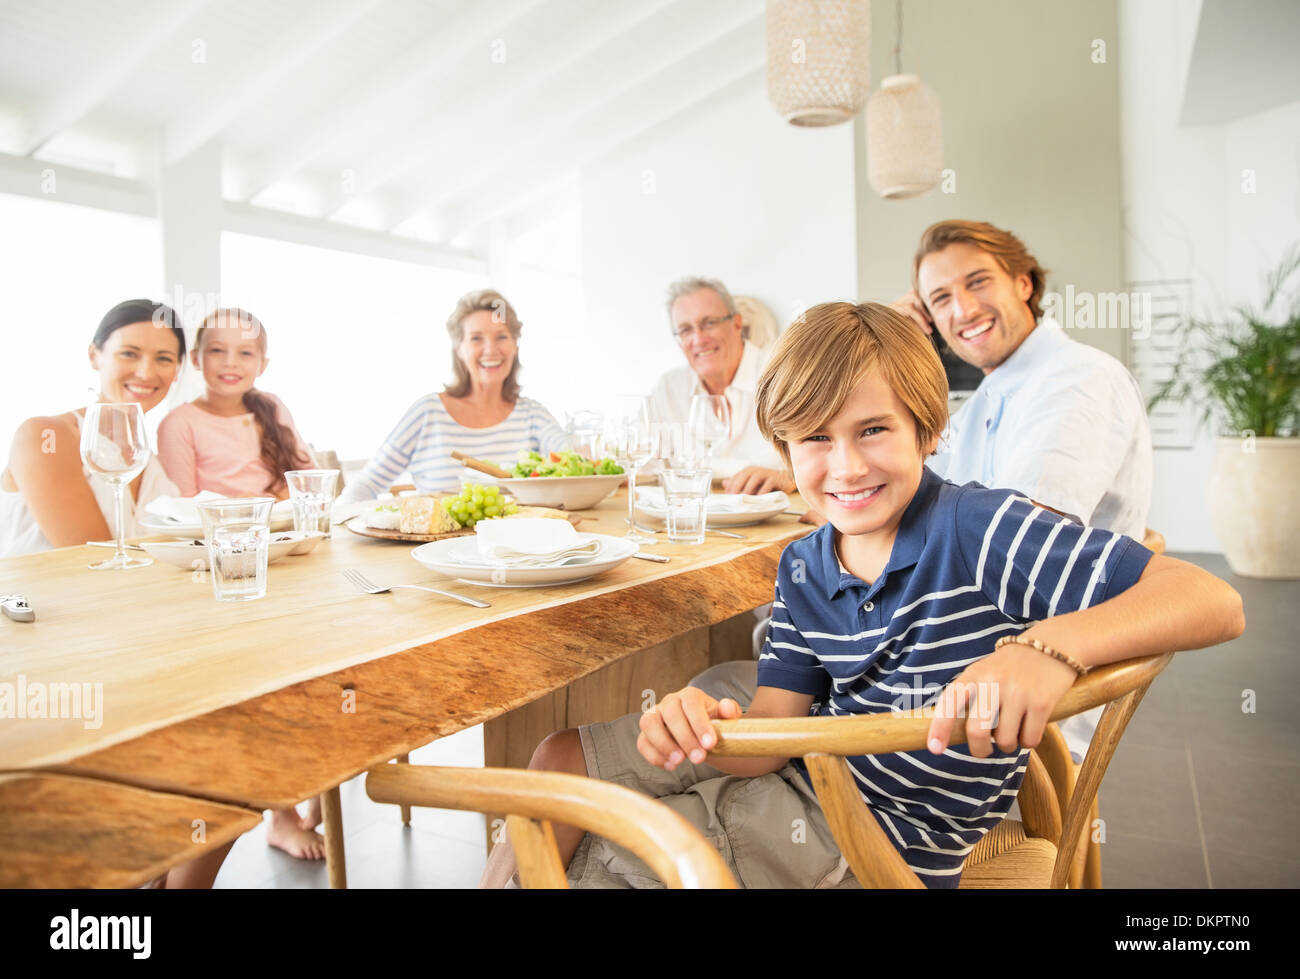 Family smiling together at table Banque D'Images